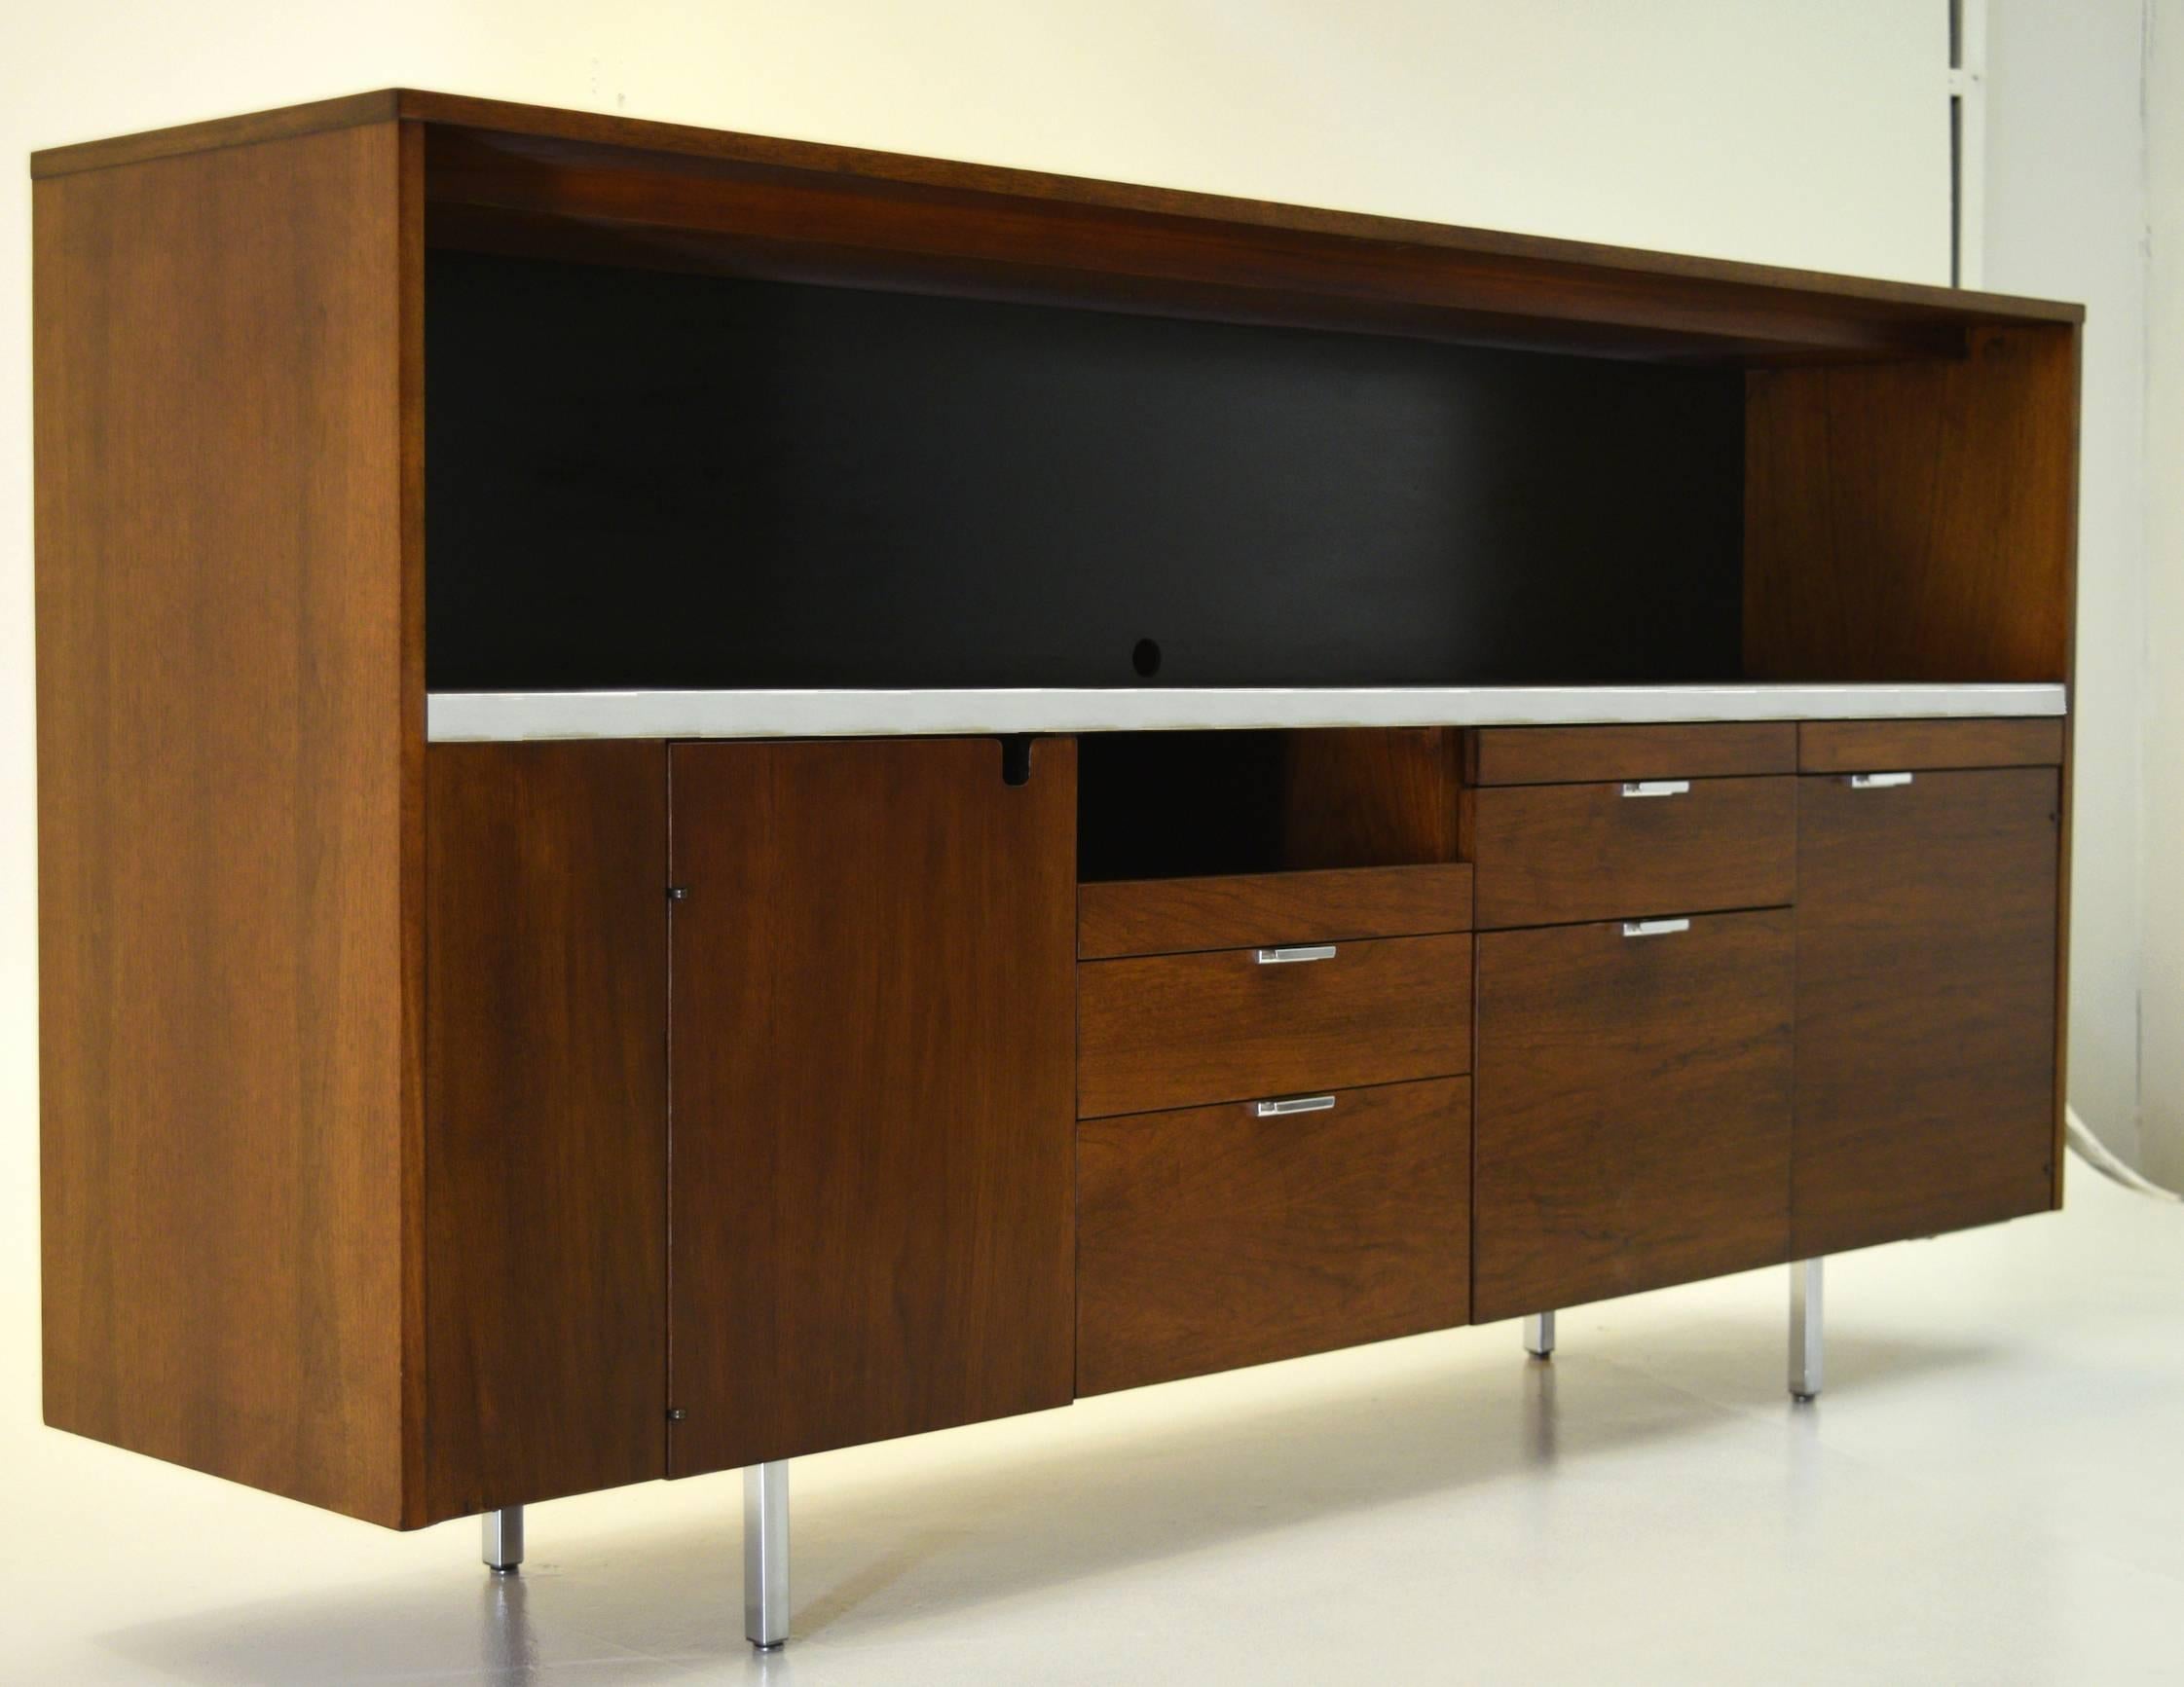 George Nelson
Herman Miller, Executive Office Group (EOG) Series
circa 1962
Lacquered walnut, steel and chrome.
Measures: 80.75 wide x 18.5 deep x 43 inch tall

Customized for a client, this large credenza boasts storage more akin to a desk and